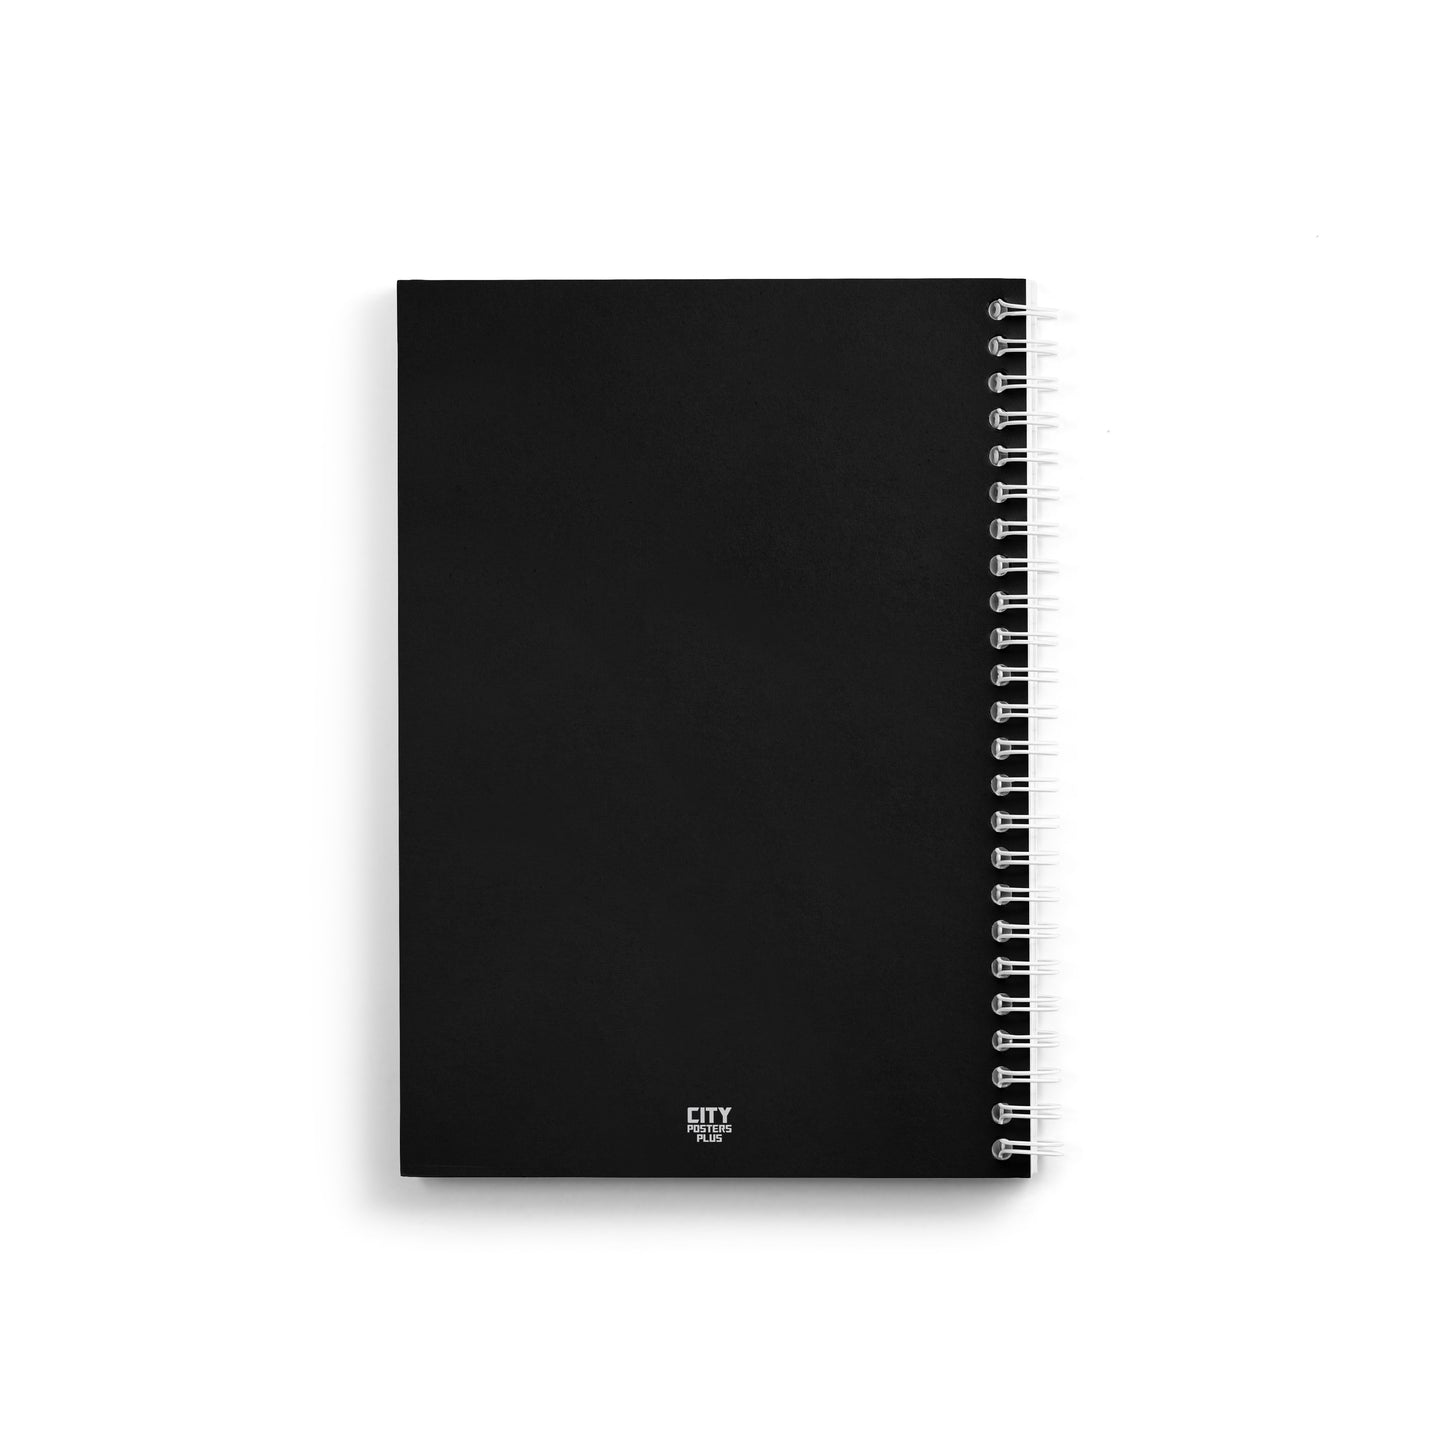 Aantaliya Notebook (A5 Size, 100 Pages, Ruled)